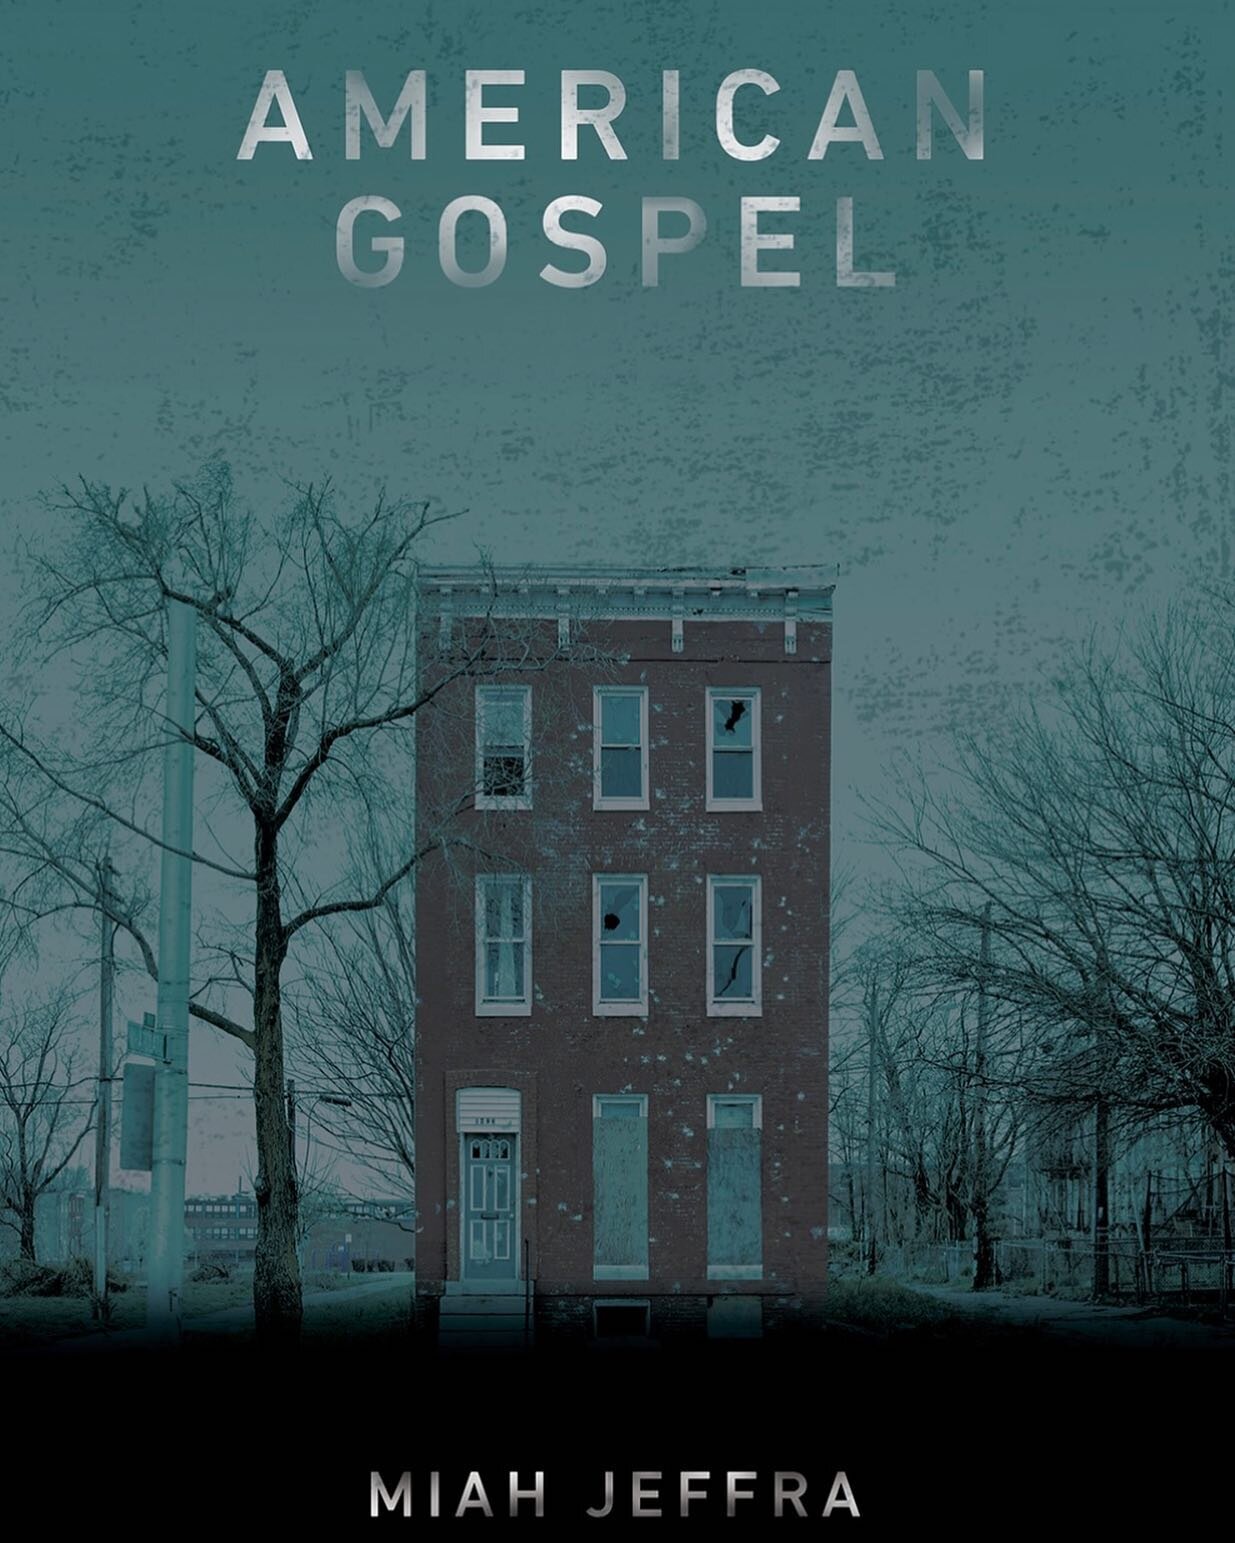 Hi all! One of our past contributors, Miah Jeffra @miahjeffra is releasing their fifth novel, &ldquo;American Gospel&rdquo; on March 24th! 

This novel is told from three different powerful perspectives and voices to create a captivating image of the